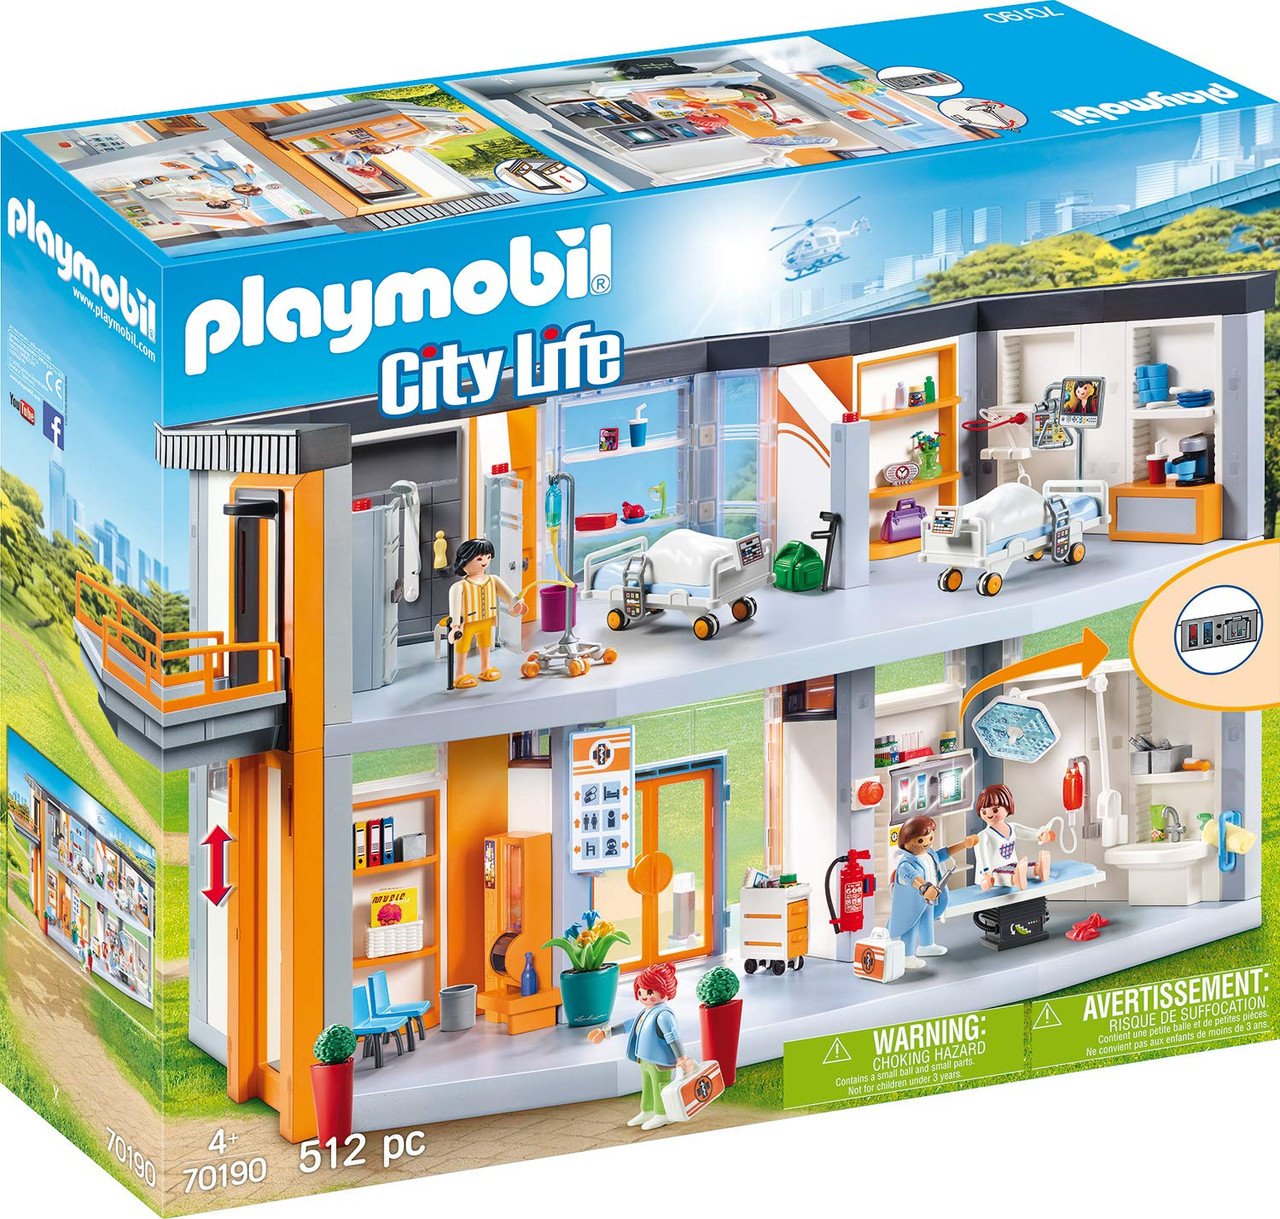 Playmobil Doctor with Child specifications